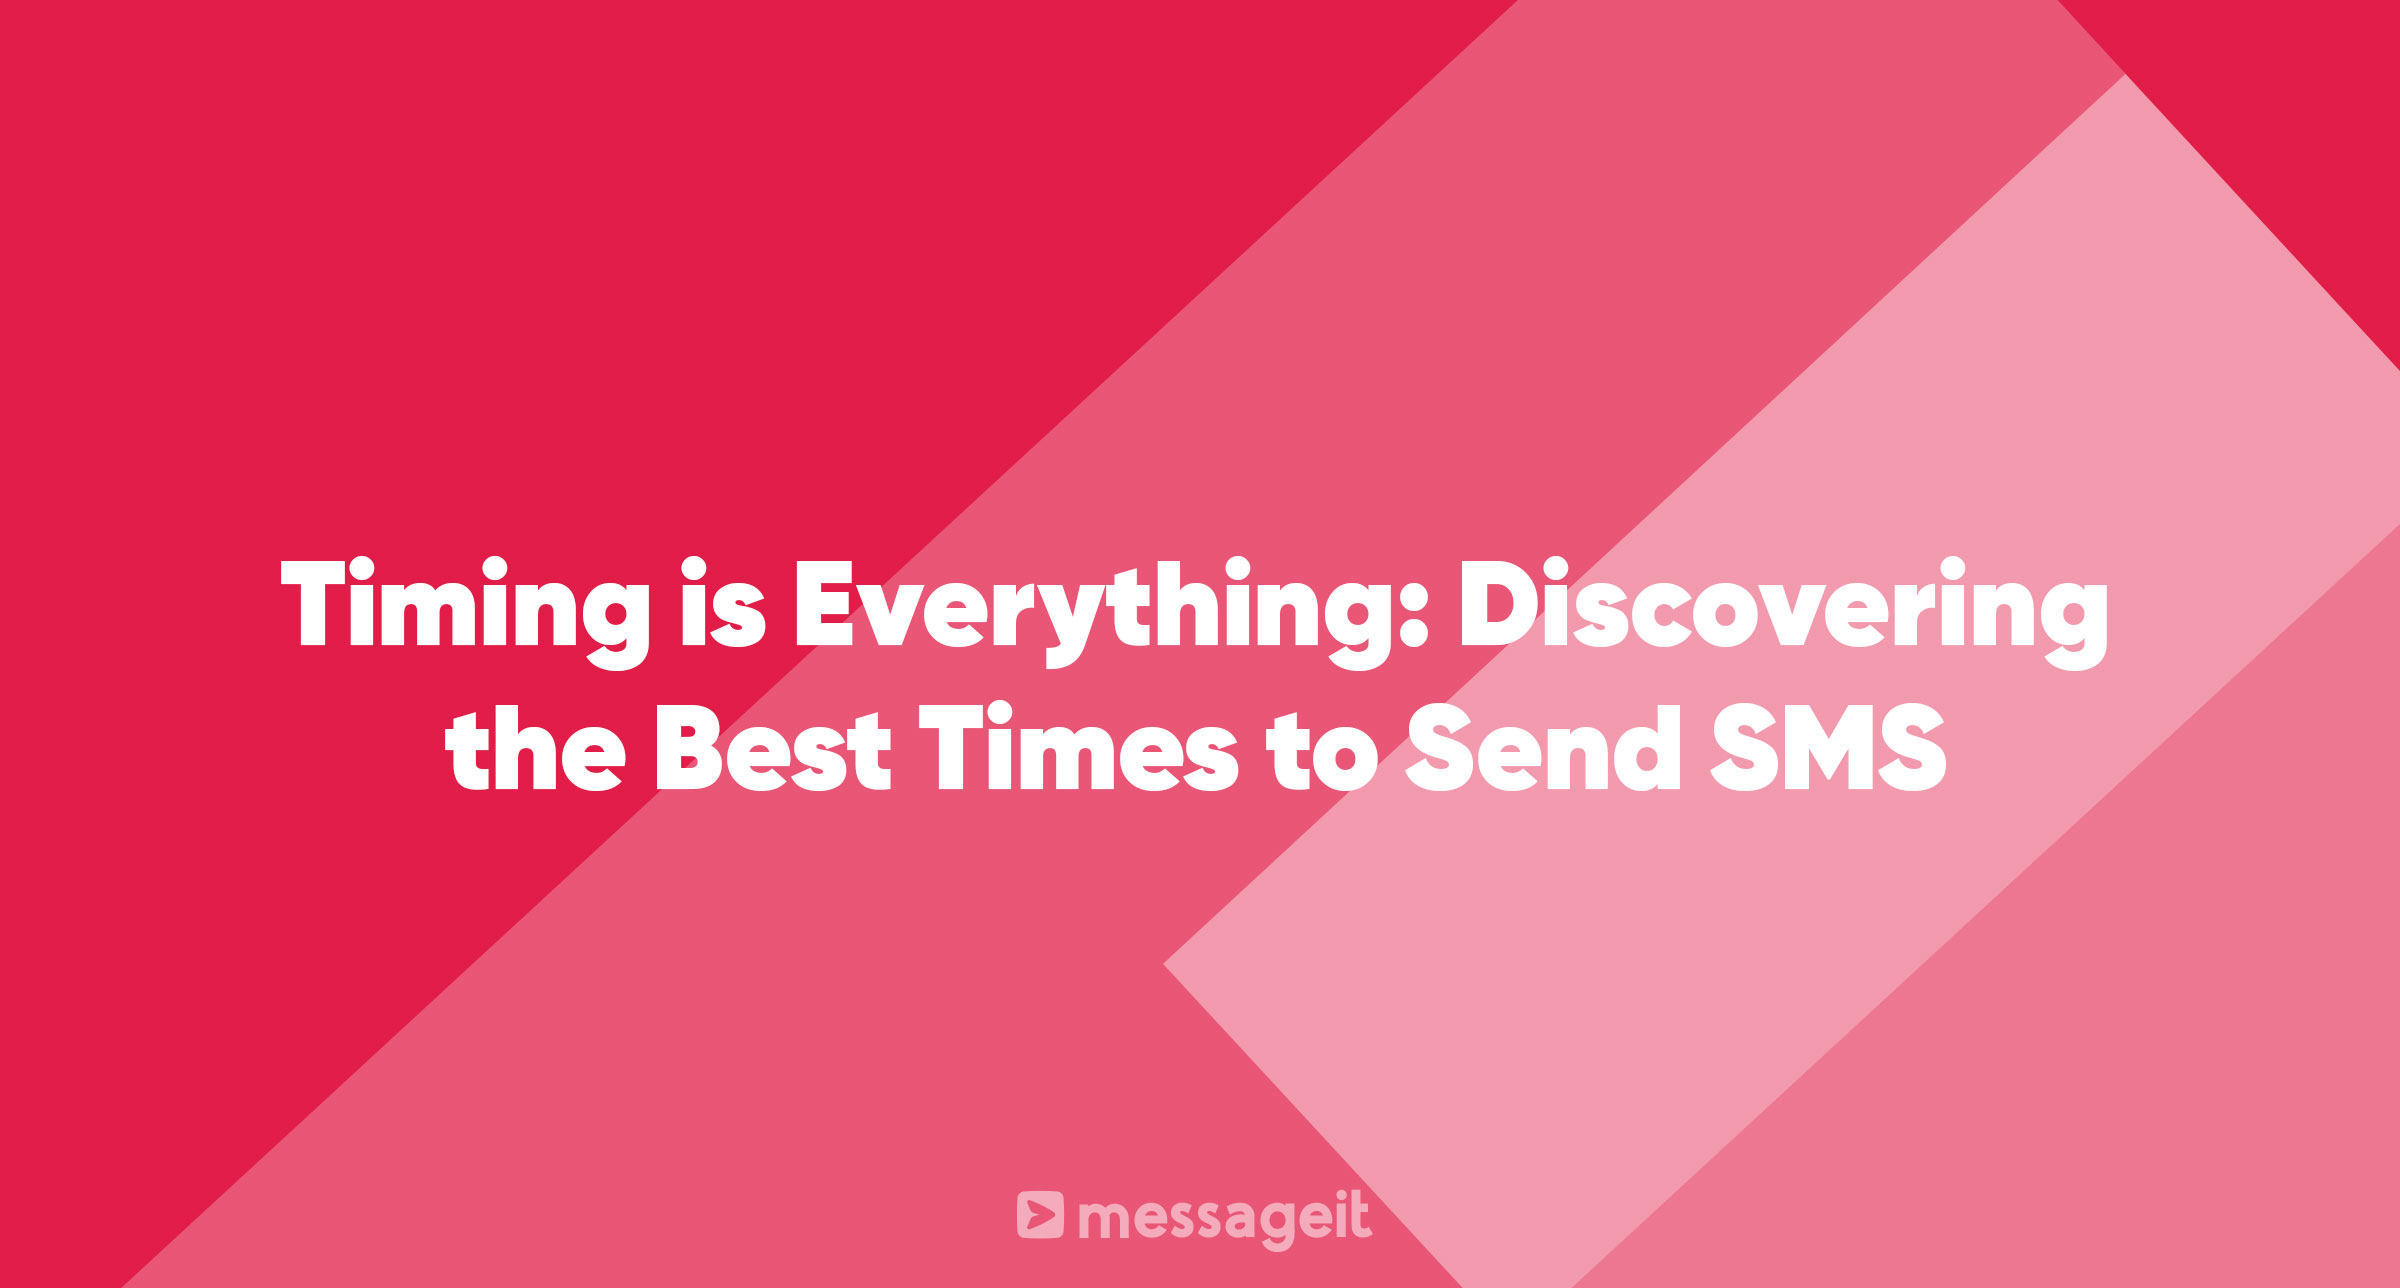 Article | Timing is Everything: Discovering the Best Times to Send SMS